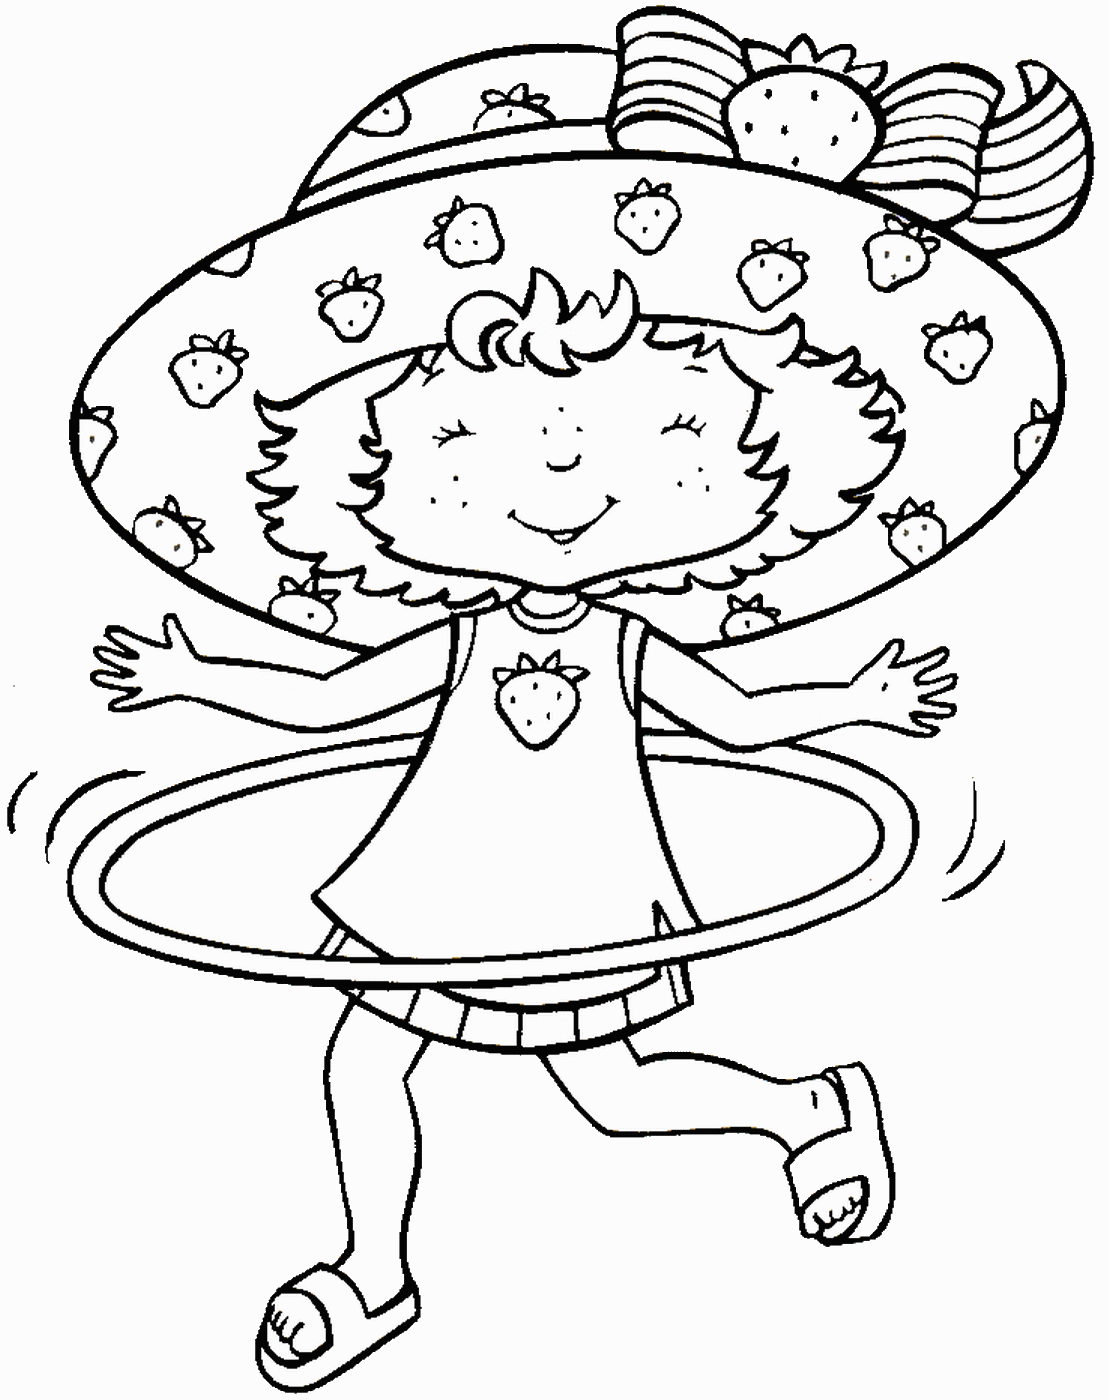 Strawberry Shortcake Coloring Pages TV Film Printable 2020 08116 Coloring4free